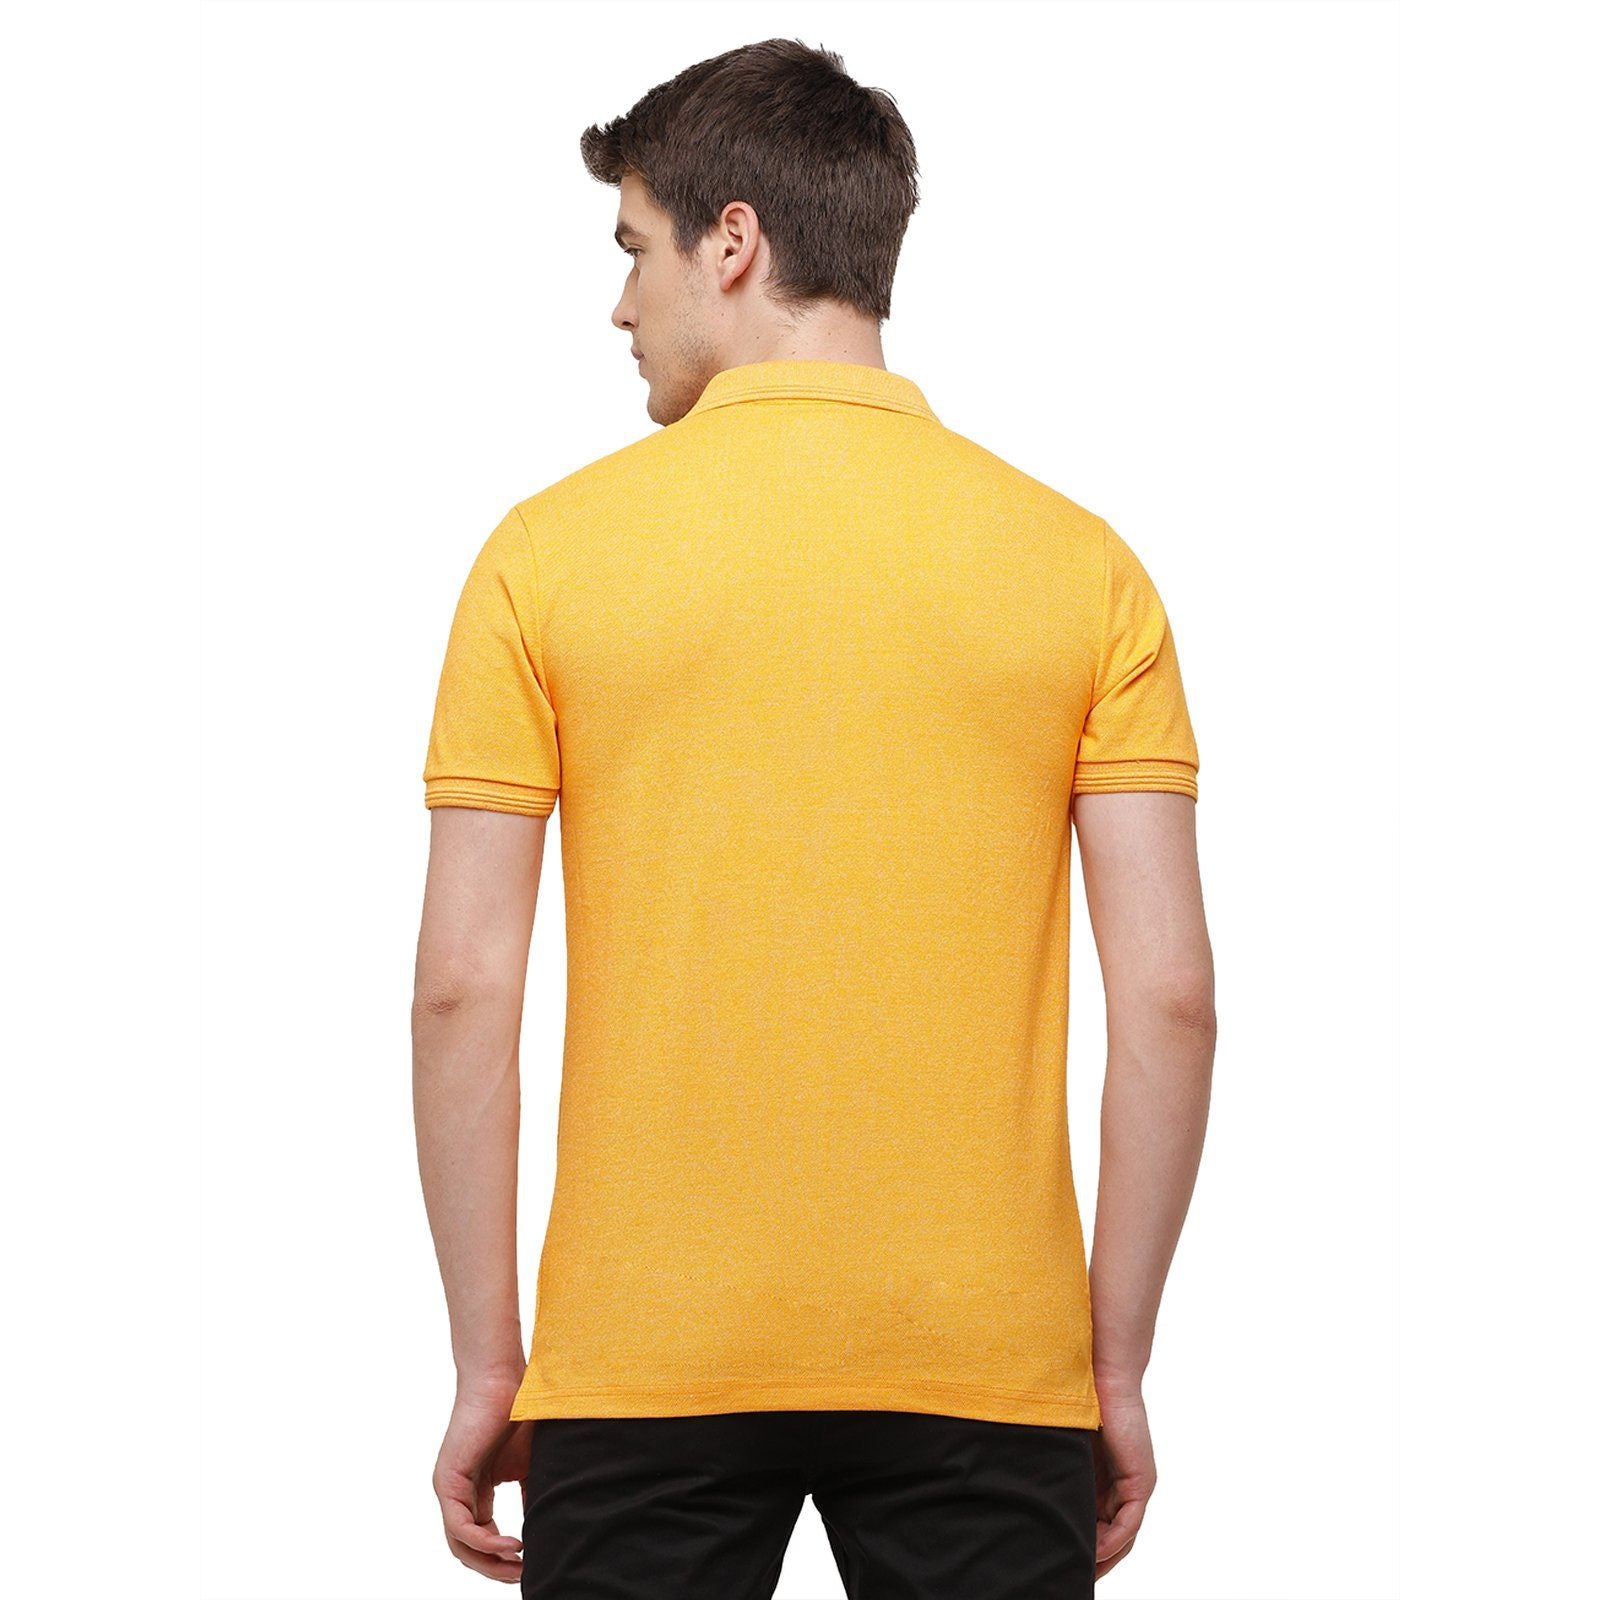 Classic polo Men's Mustard Trendy Grindle Polo Half Sleeve Slim Fit T-Shirt - Proten Mustard T-shirt Classic Polo 